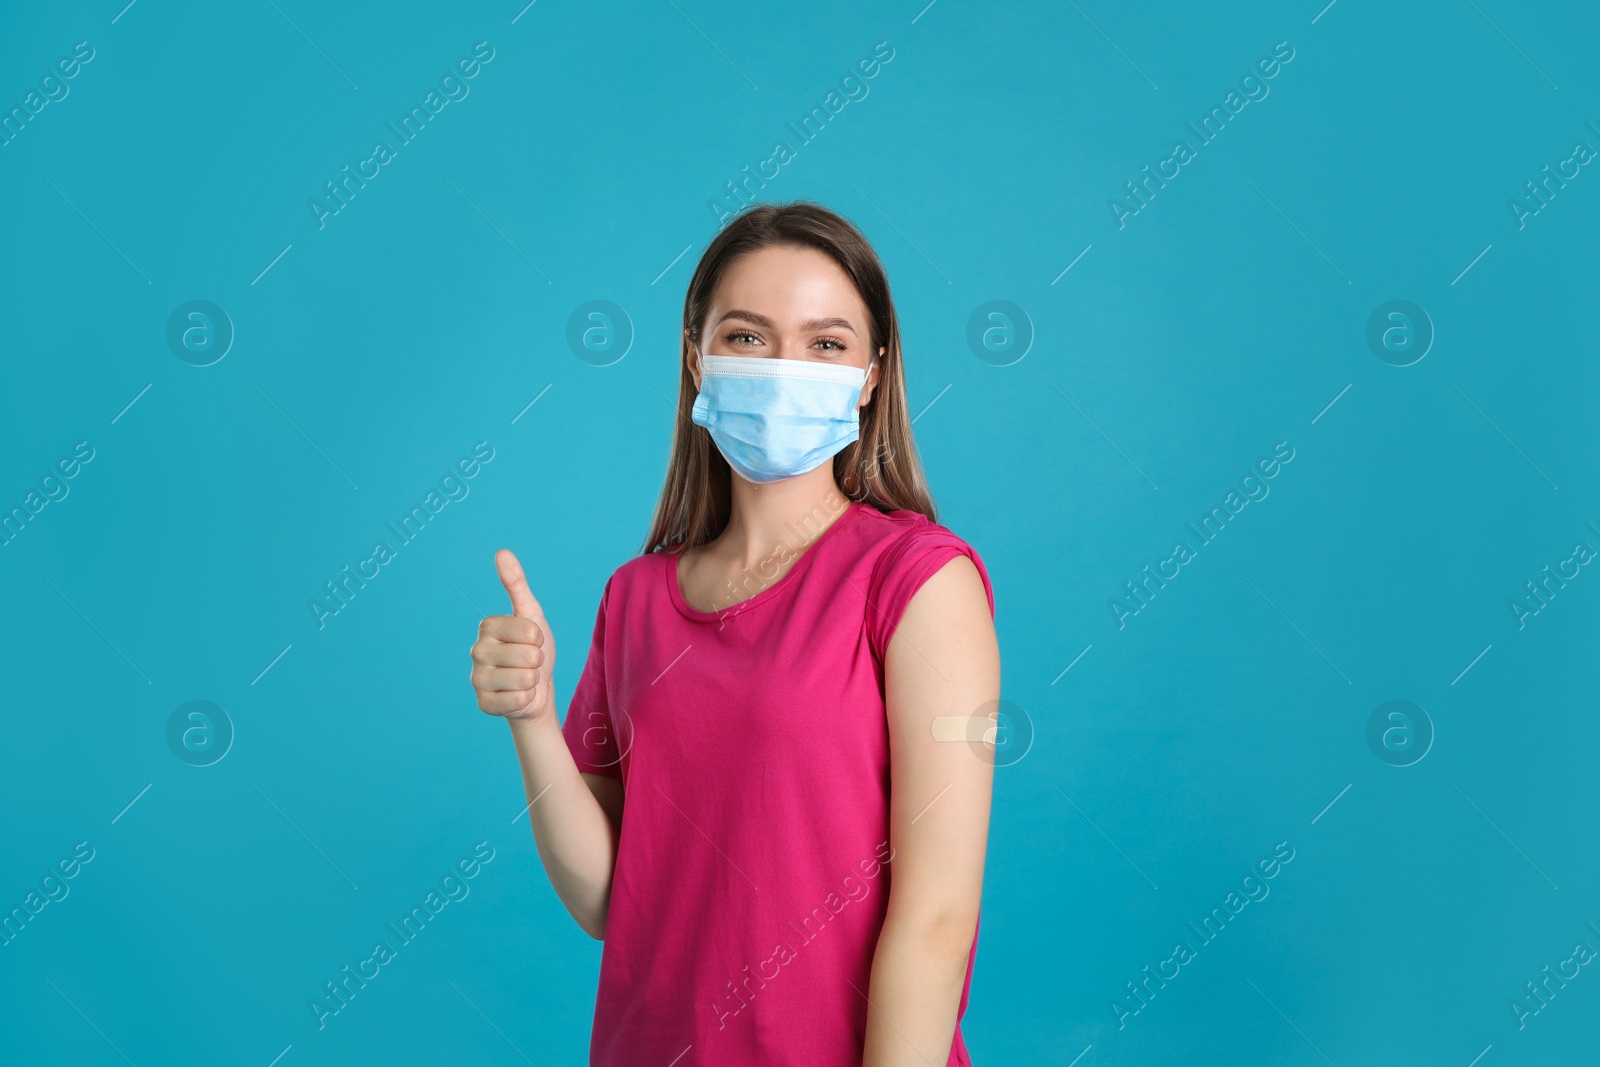 Photo of Vaccinated woman with protective mask and medical plaster on her arm showing thumb up against light blue background